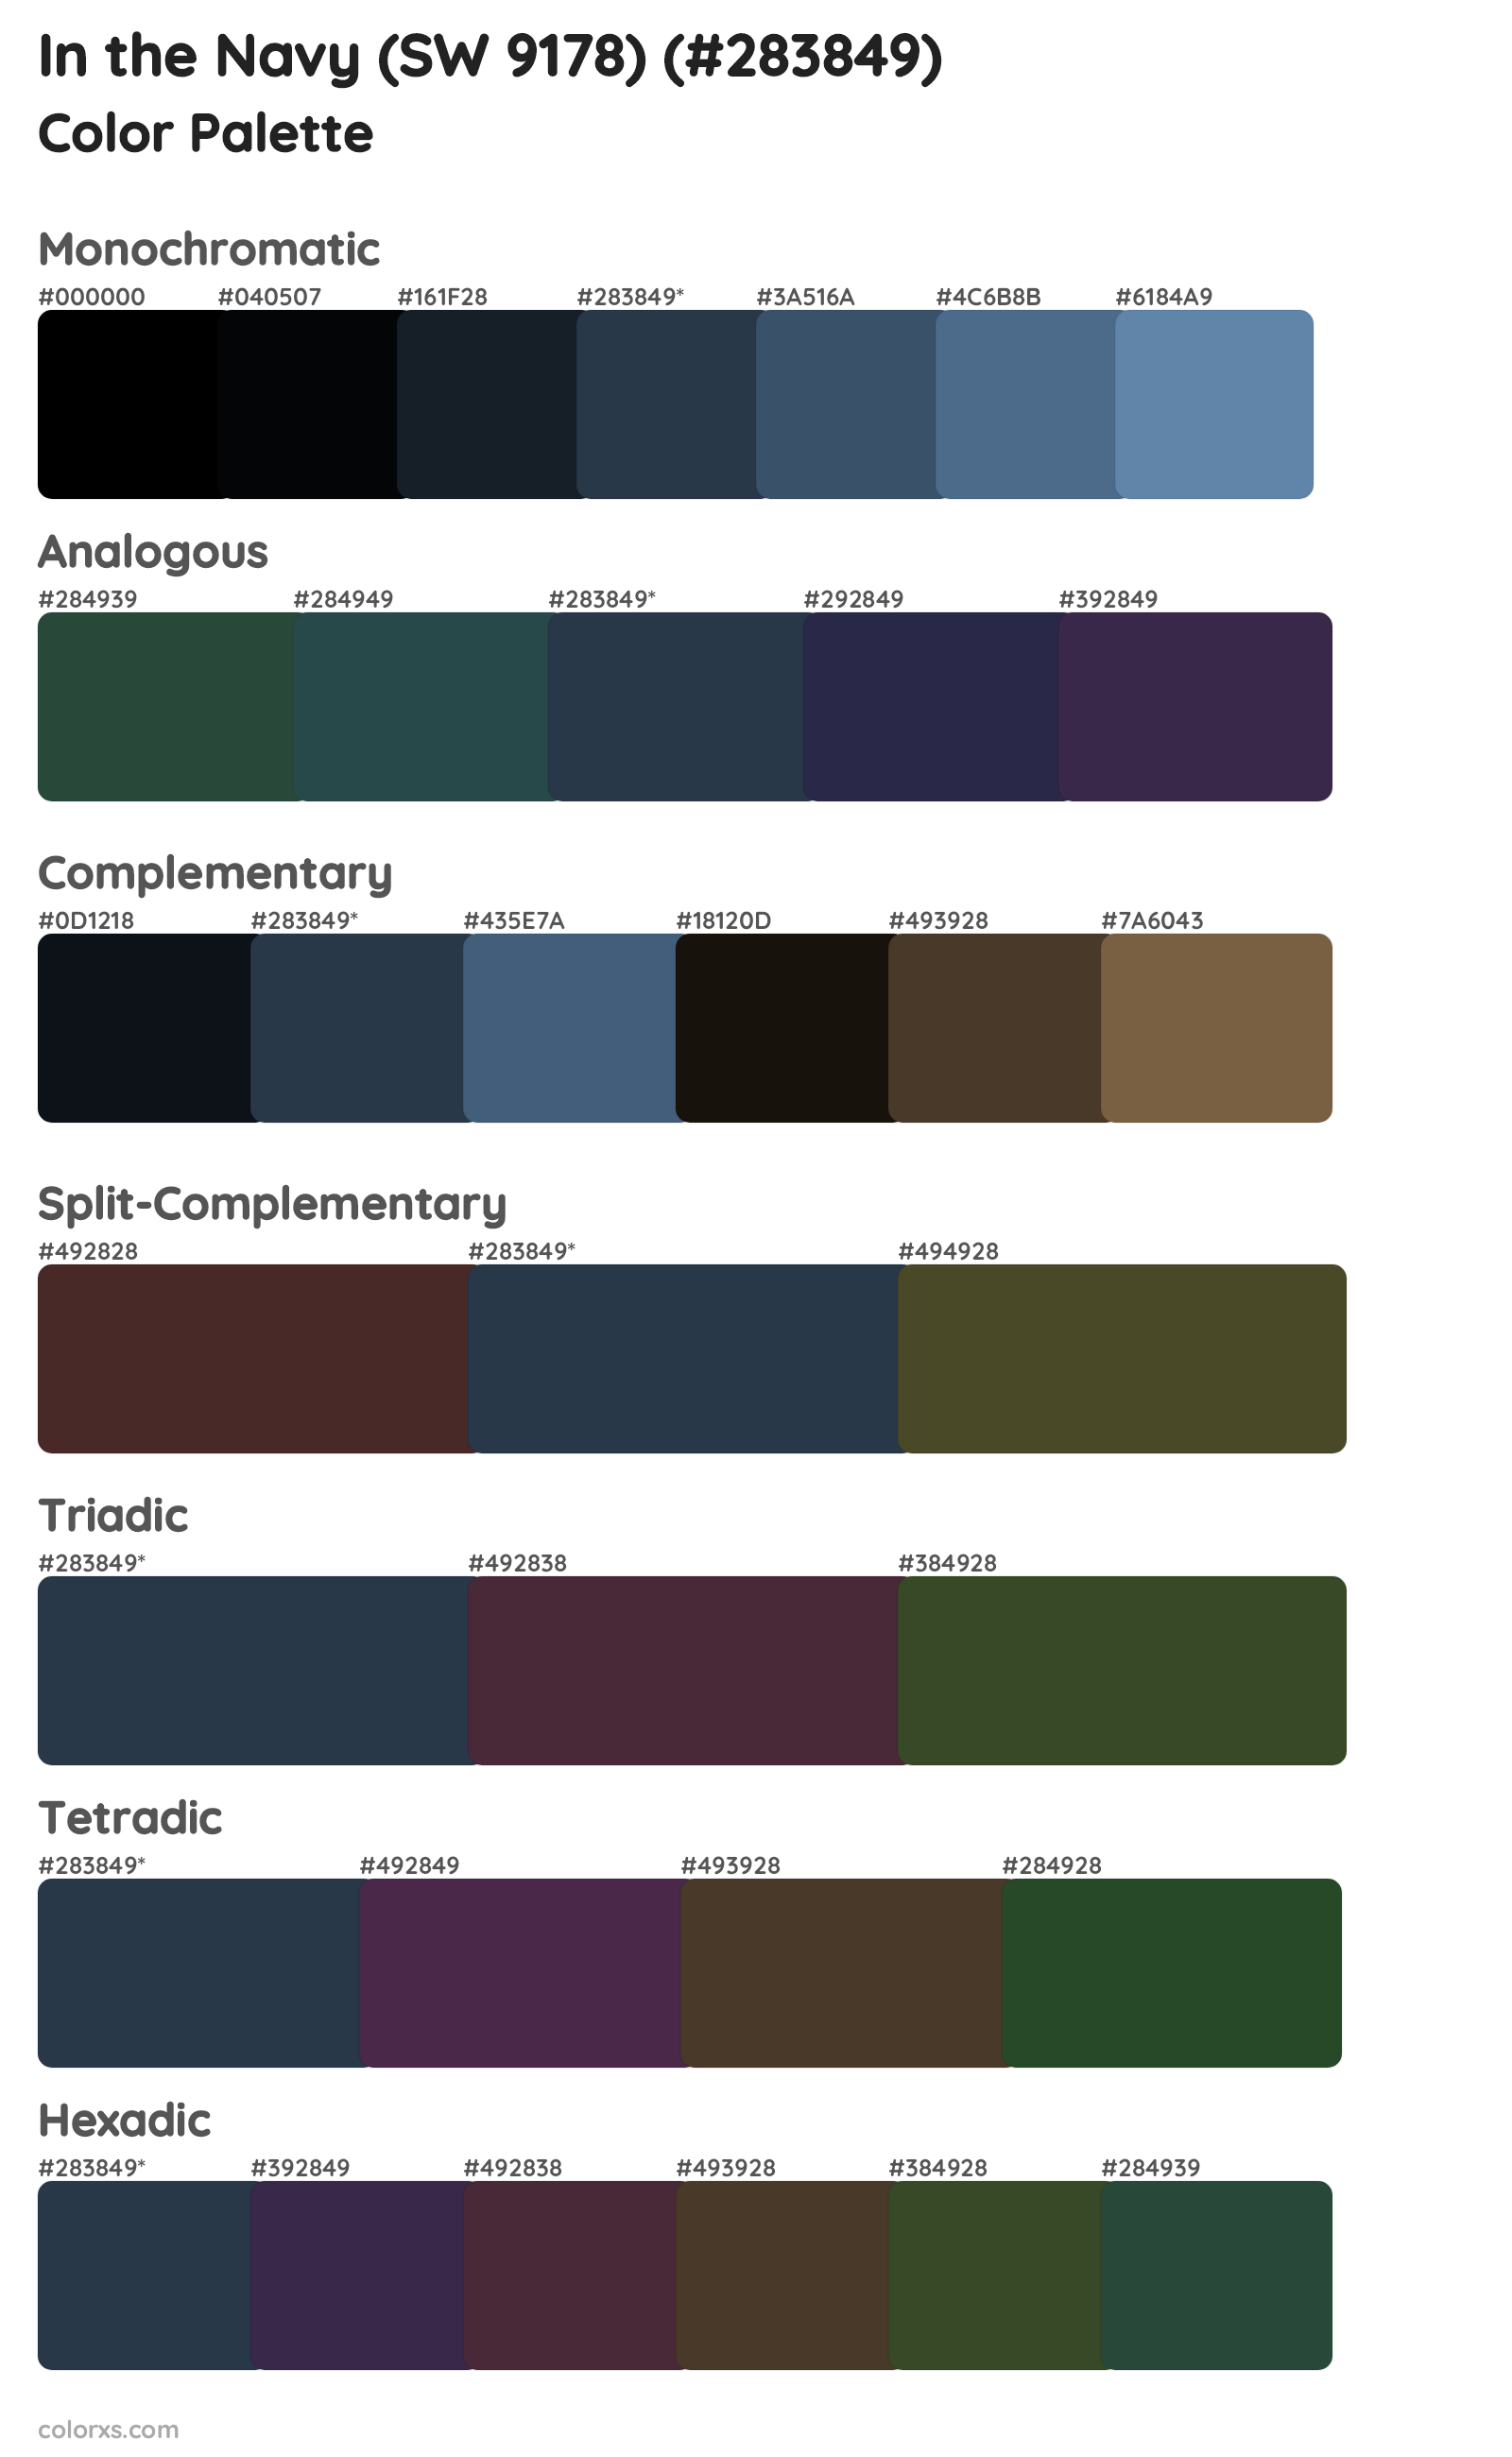 In the Navy (SW 9178) Color Scheme Palettes